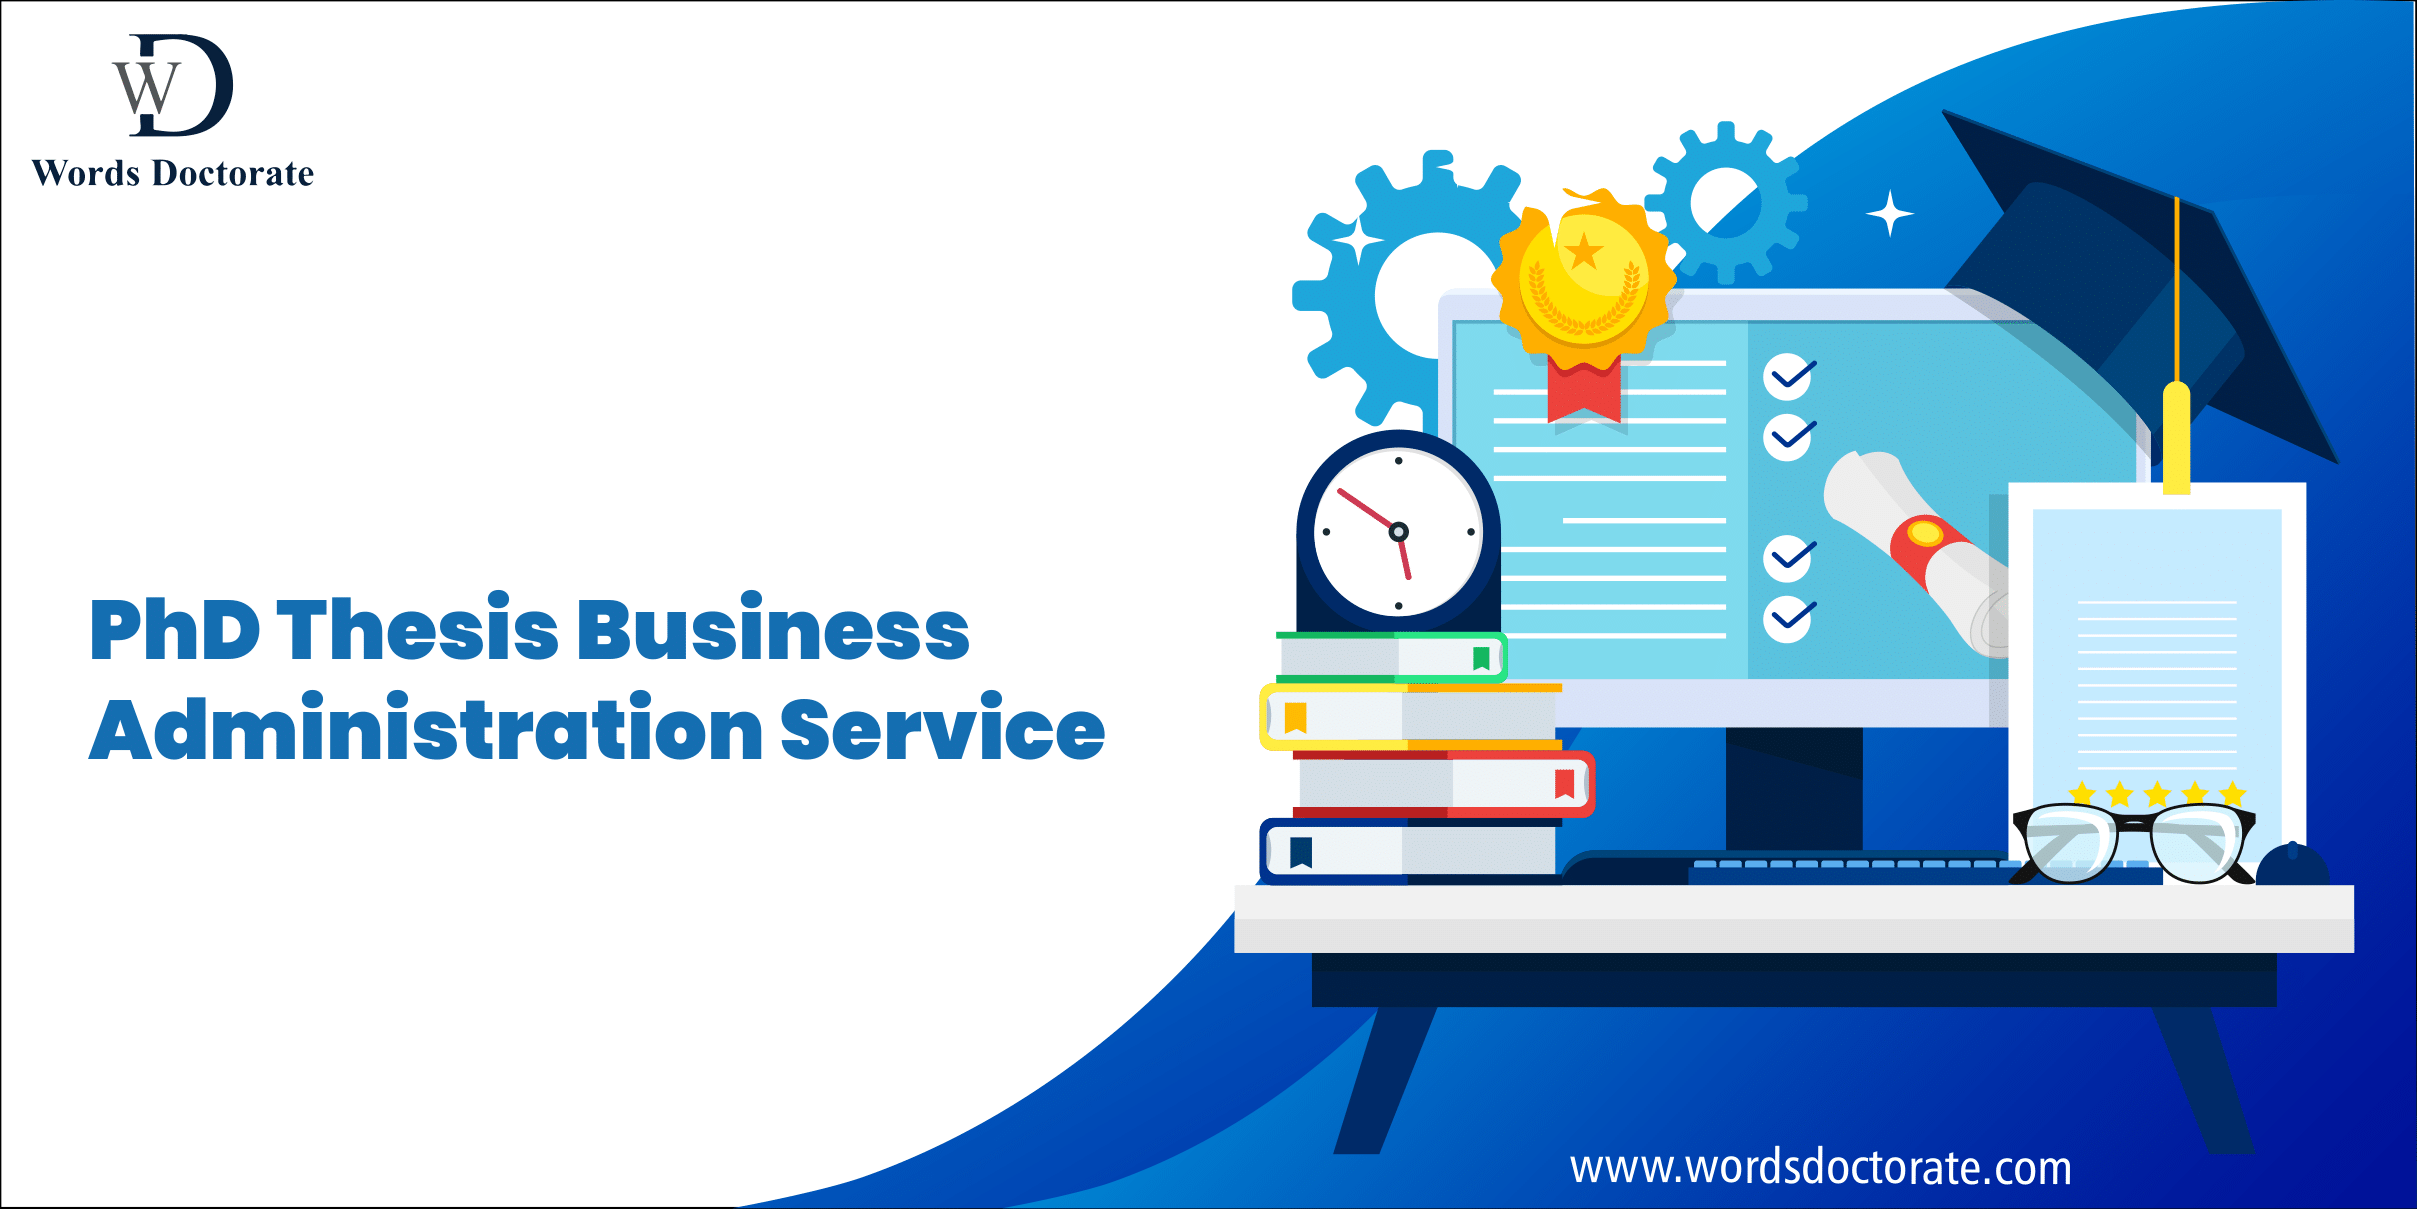 PhD Thesis Business Administration Service